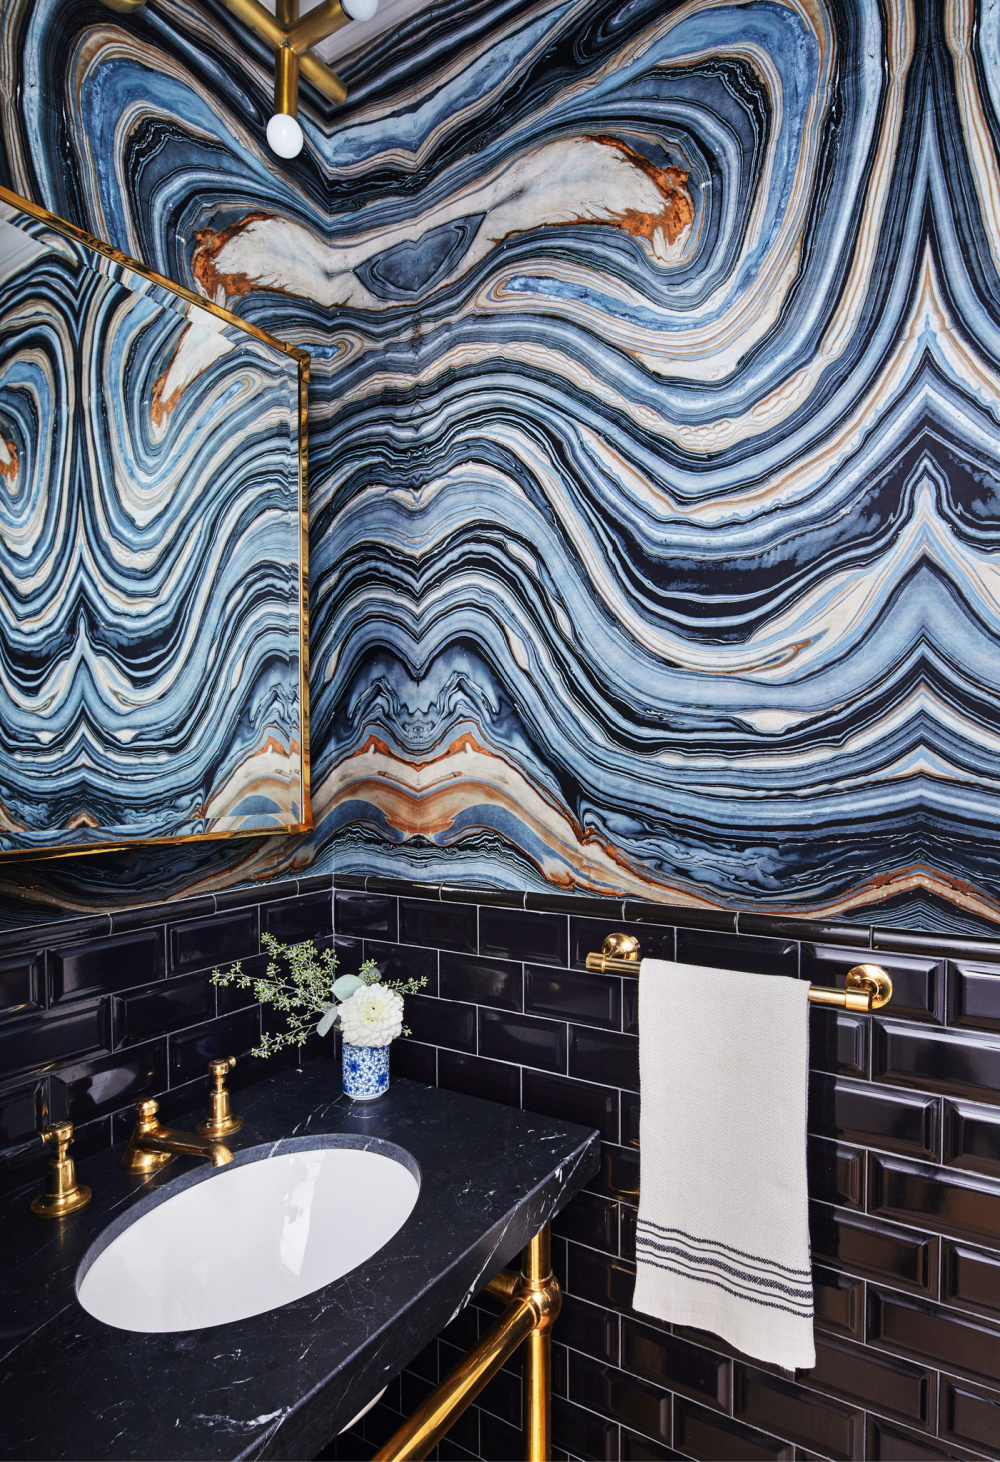 Blue agate wallcovering and luxurious fixtures in THE ULTIMATE BATH by Barbara Sallick (Rizzoli, 2022).